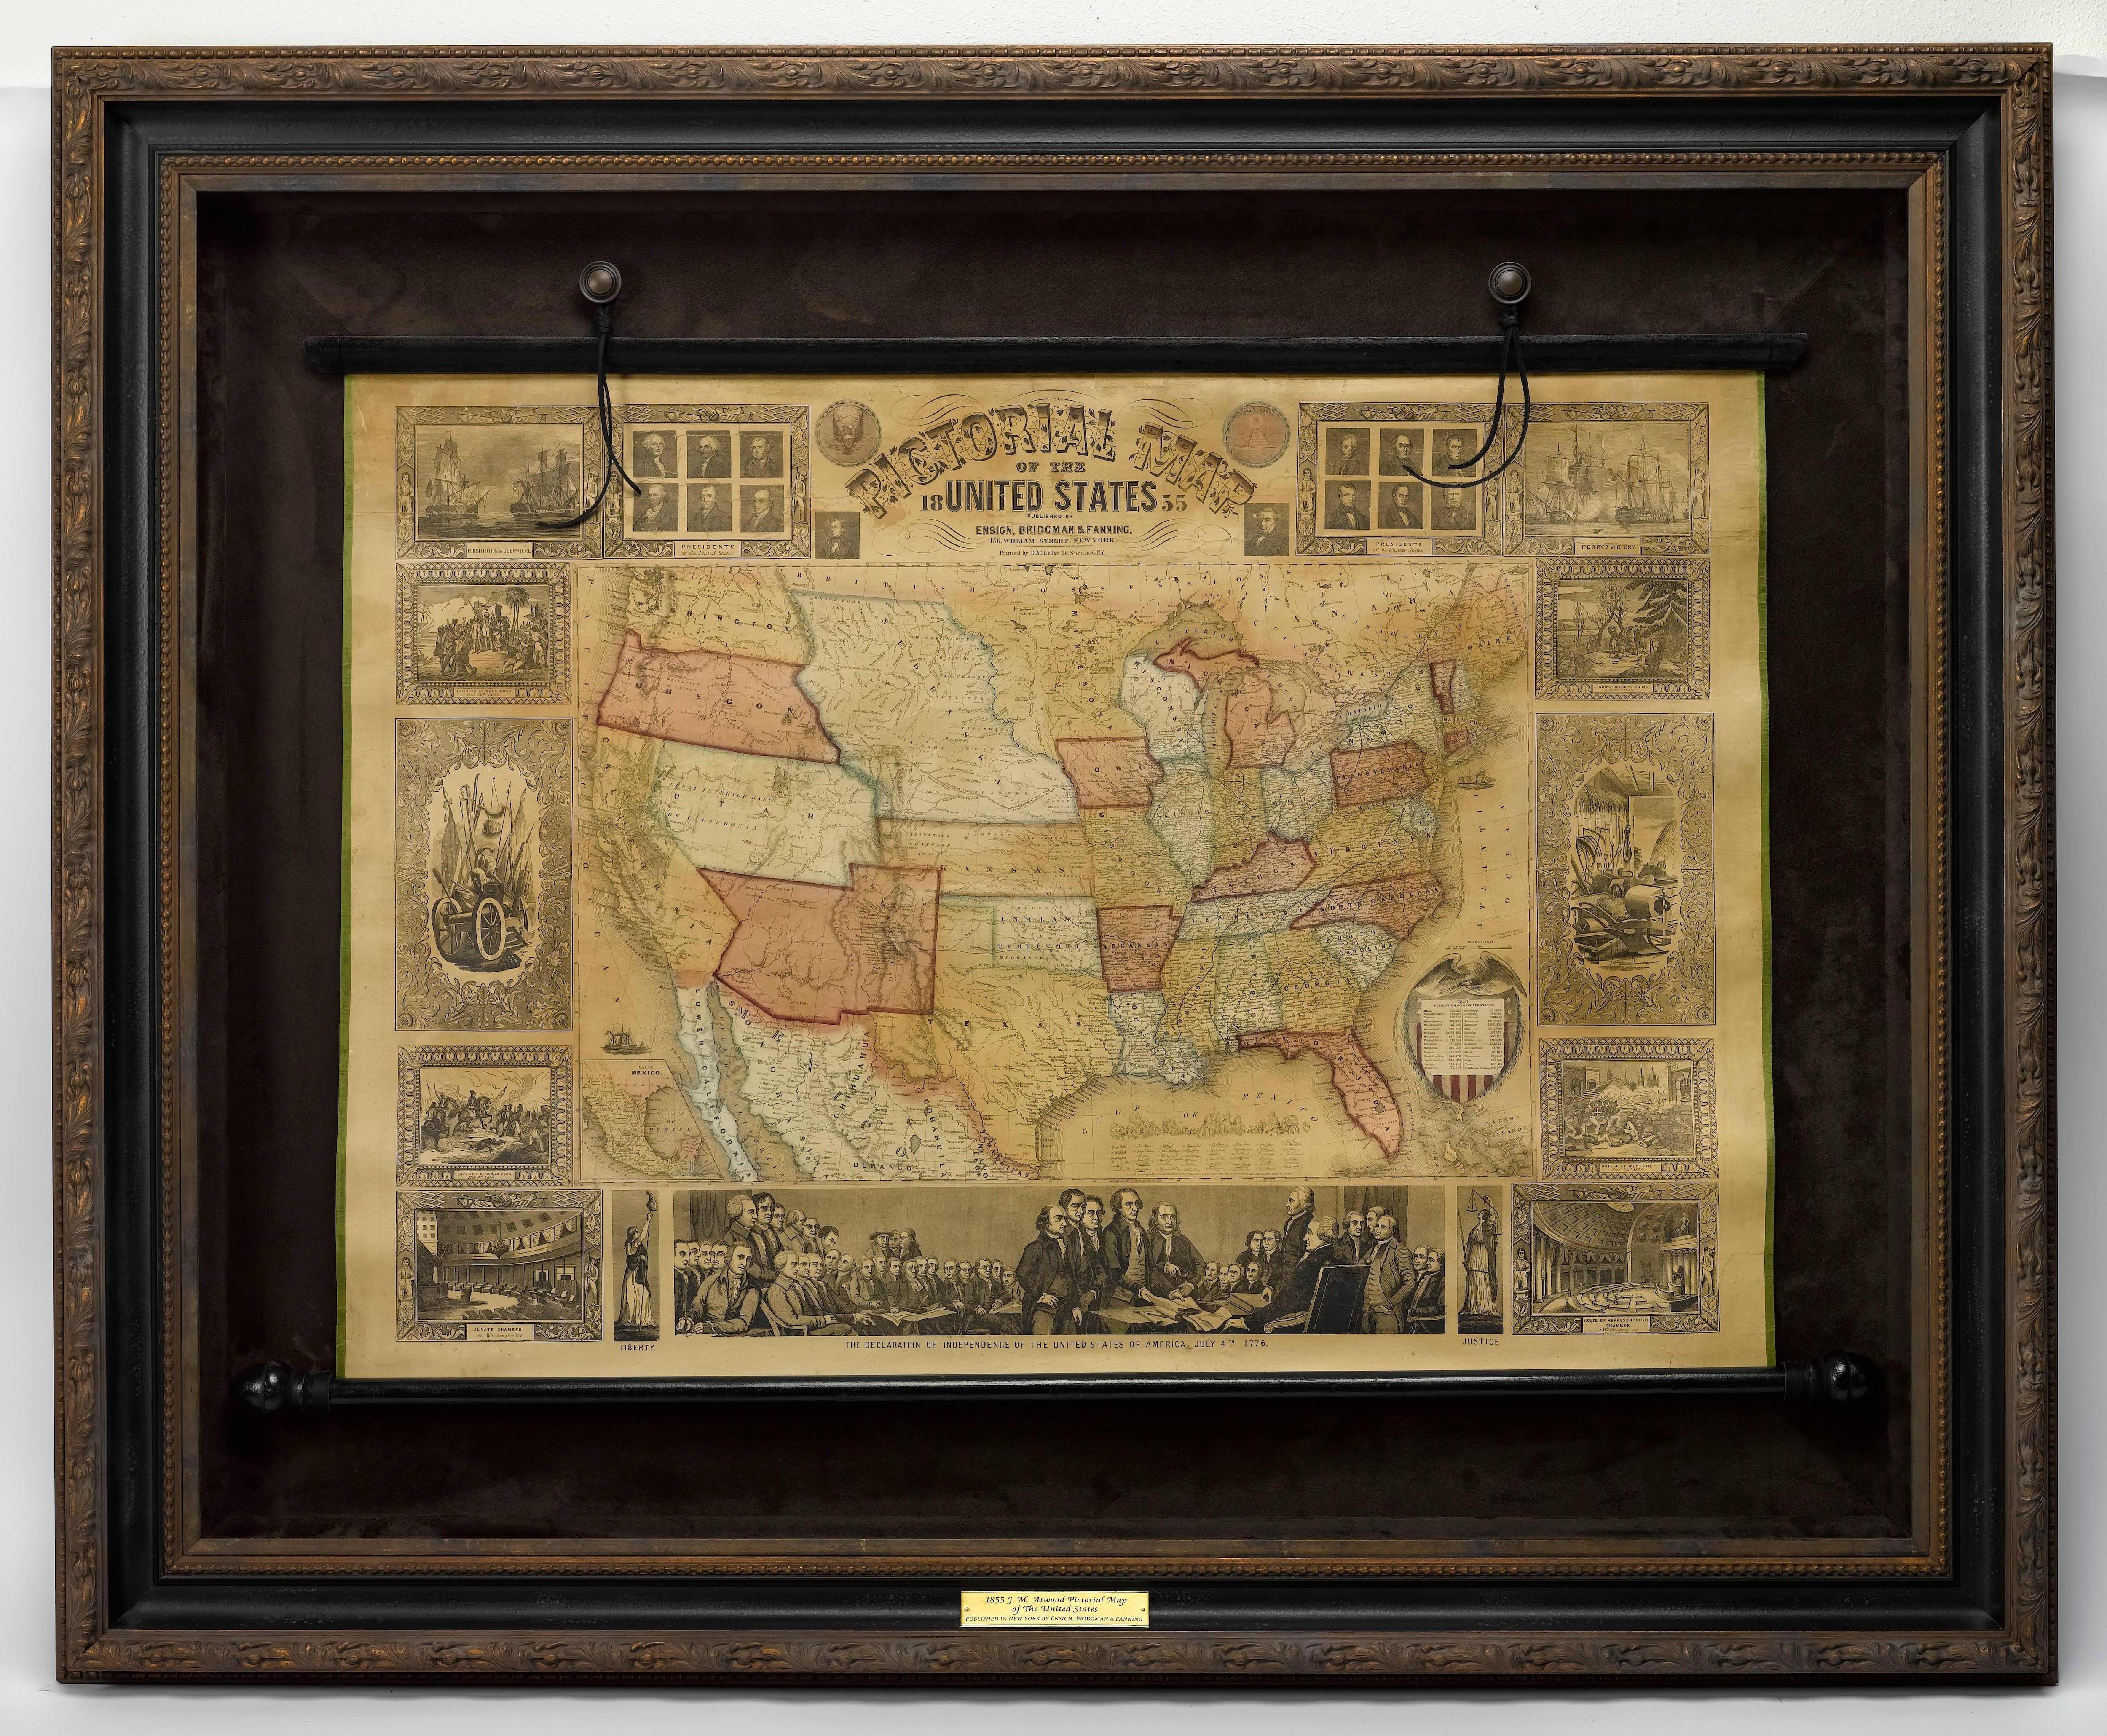 This is a large and highly decorative 1855 wall map of the United States. Issued by Ensign, Bridgman & Fanning, this map was drawn and engraved by J.M. Atwood and covers the entire United States from Atlantic to Pacific and from Canada to the Gulf